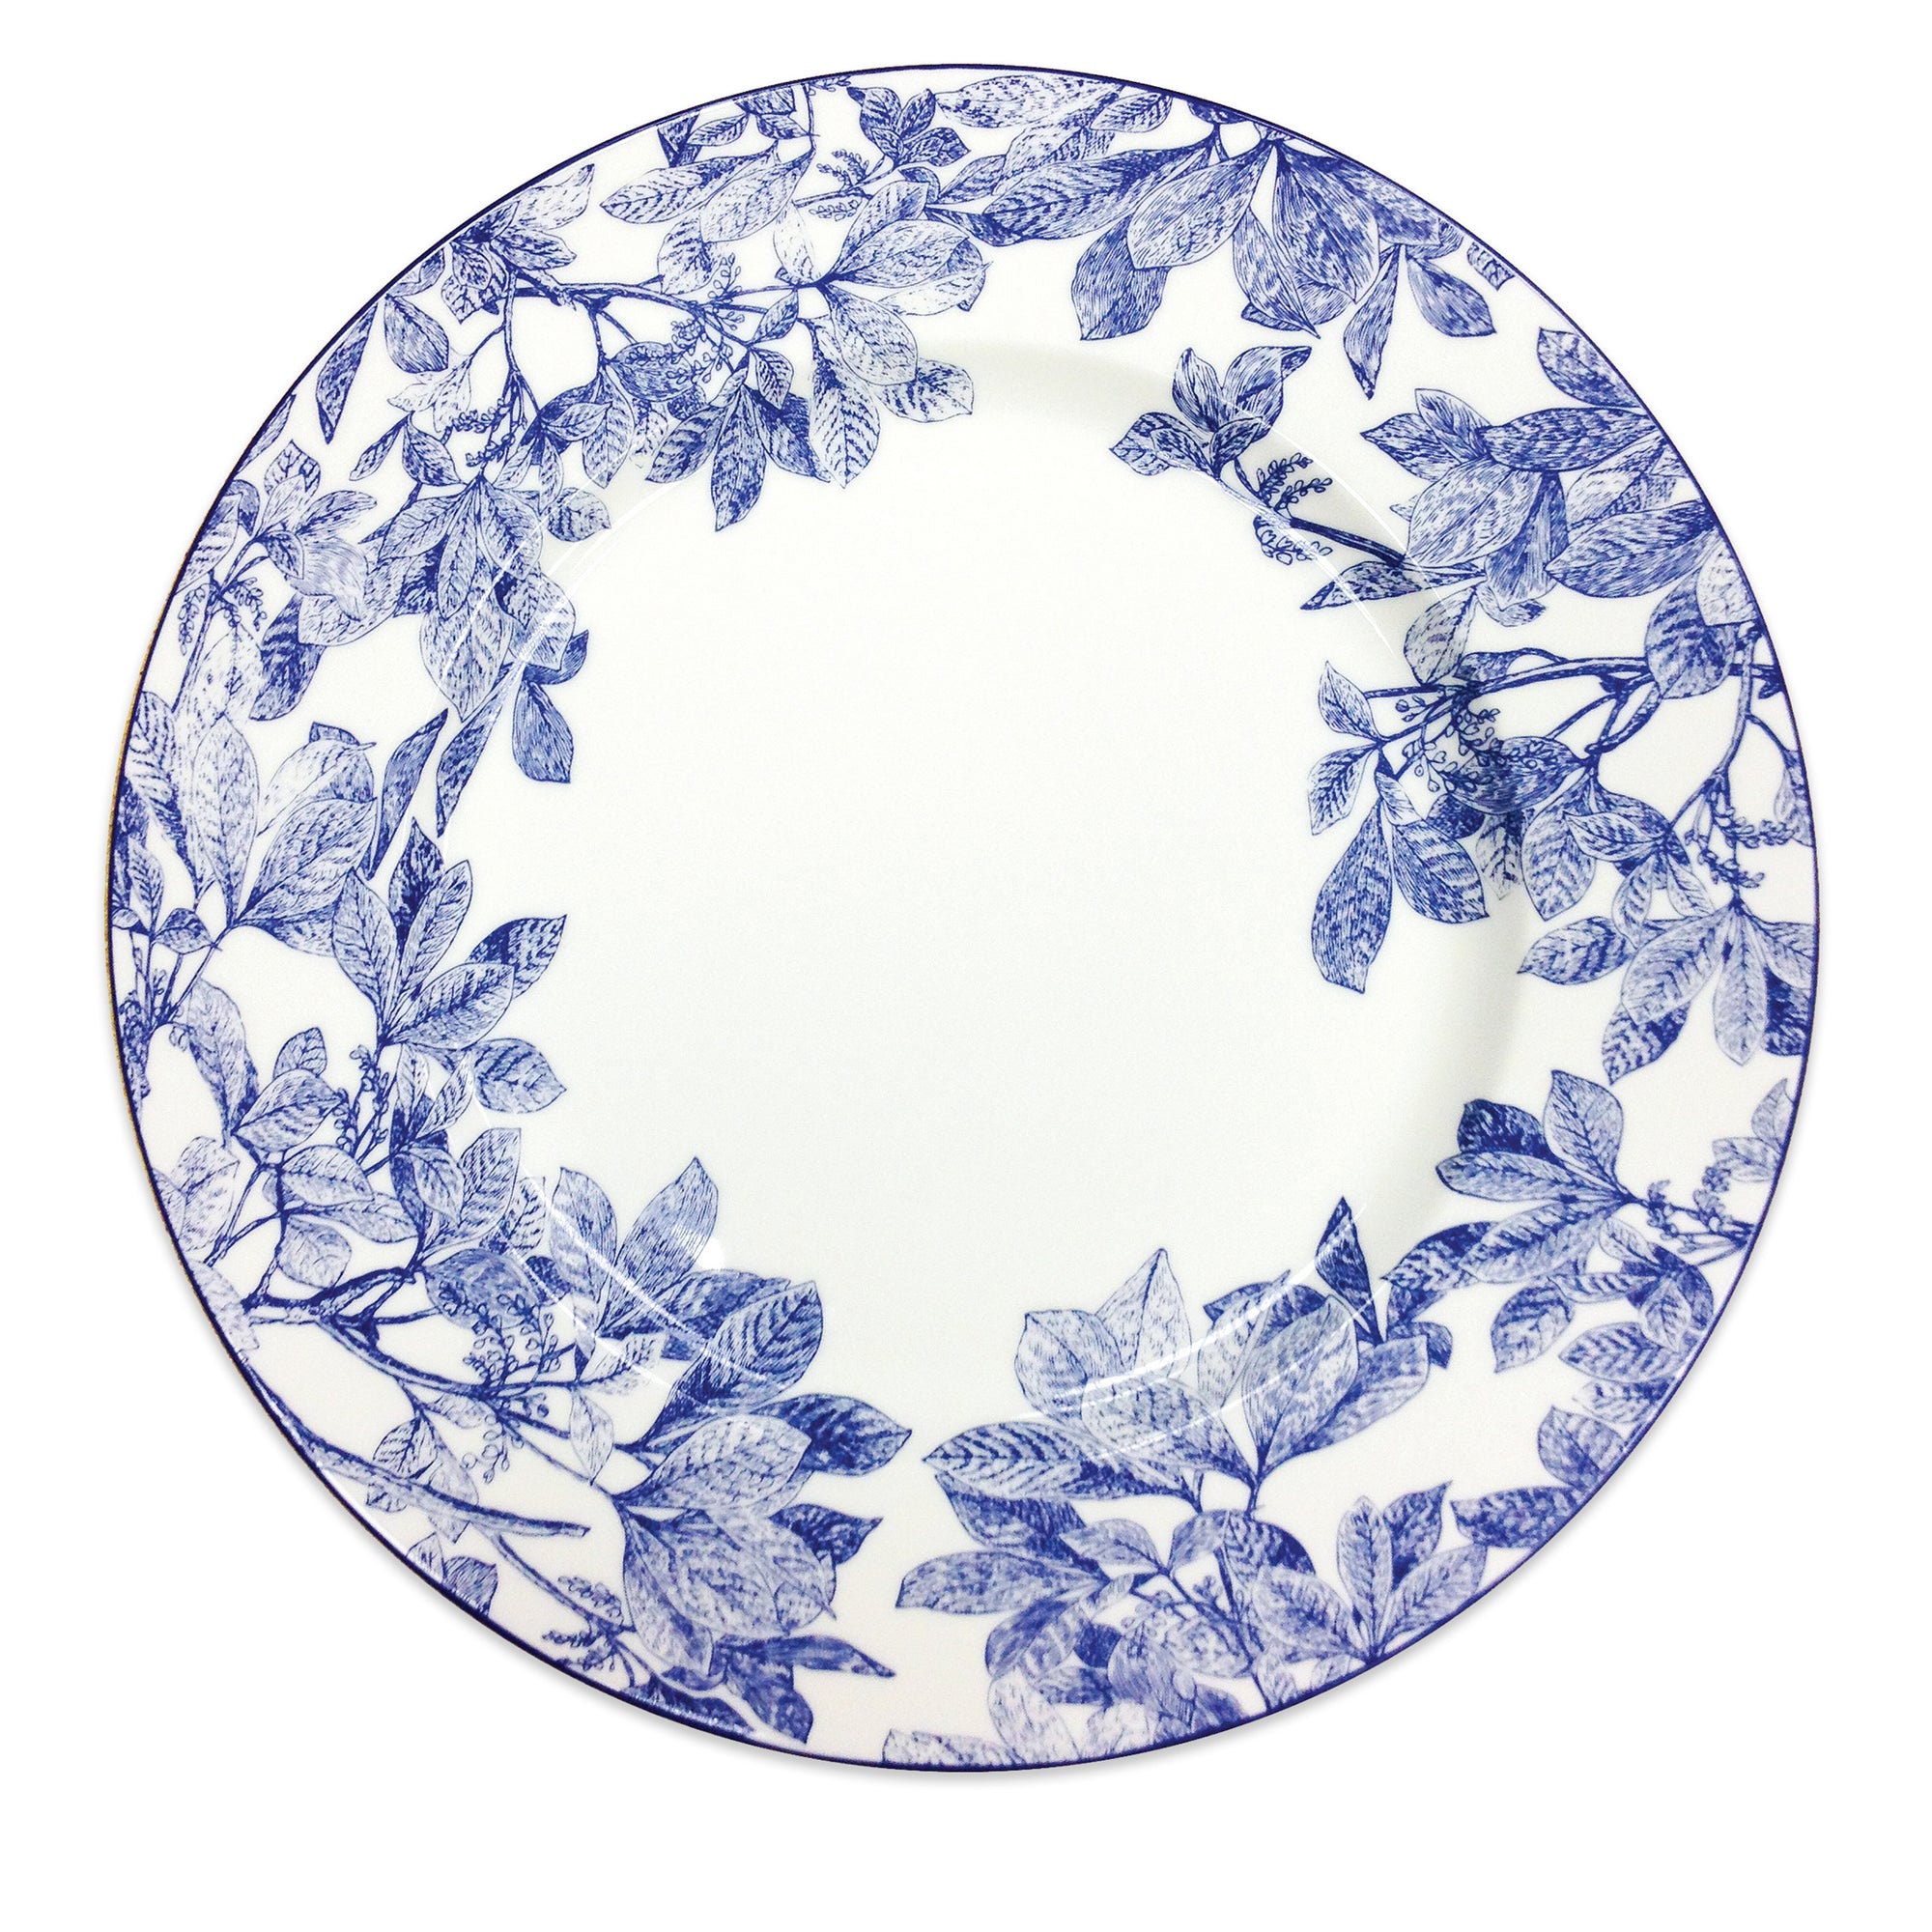 A white ceramic plate featuring blue floral and leafy botanical details along the rim, the Arbor Rimmed Charger Plate by Caskata Artisanal Home.